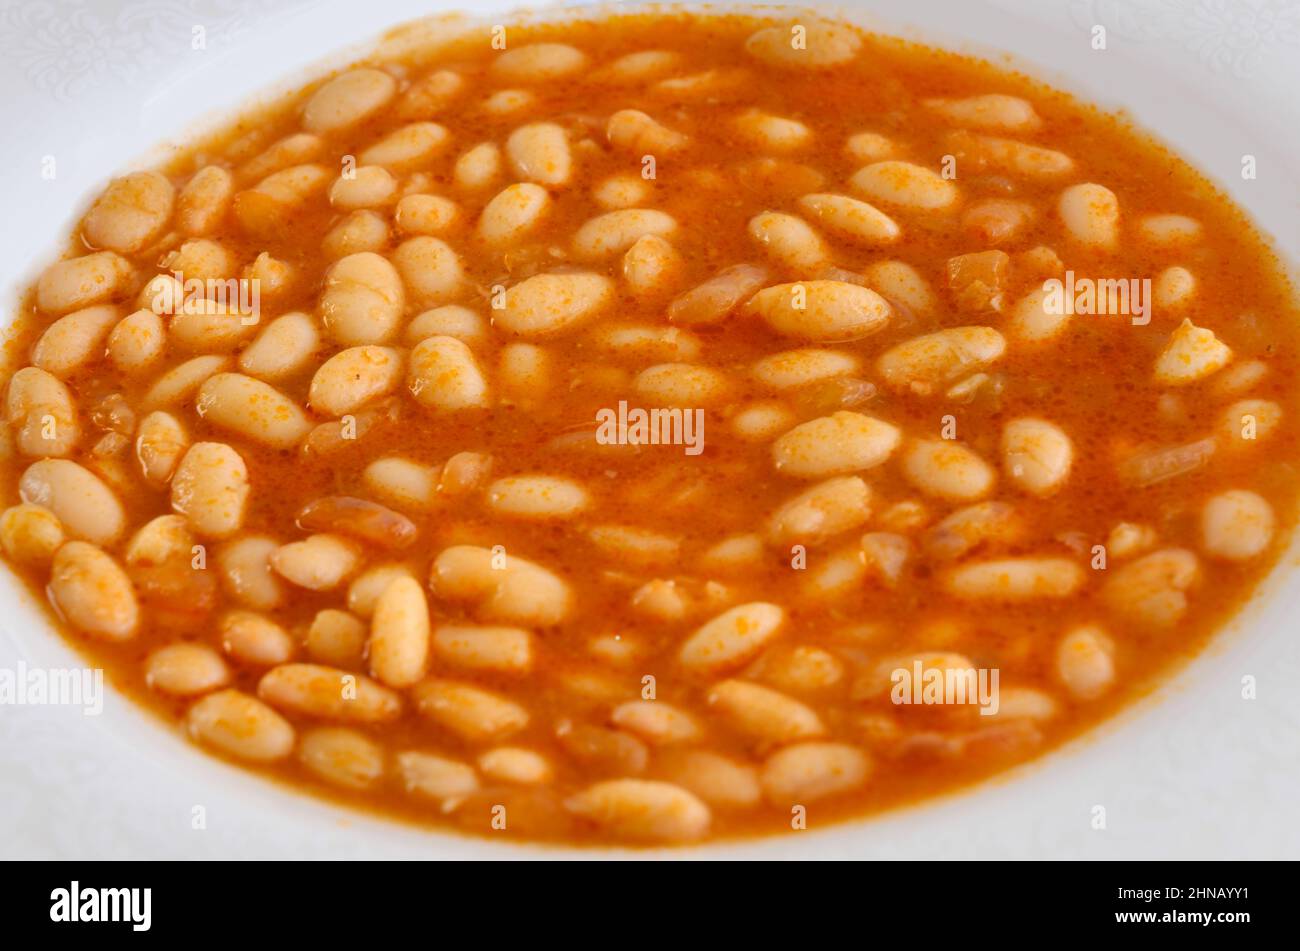 Closeup of Haricot Bean. Popular Turkish food: Kuru Fasulye on white plate background. Popular traditional food of Turkey and Middle East. Stock Photo